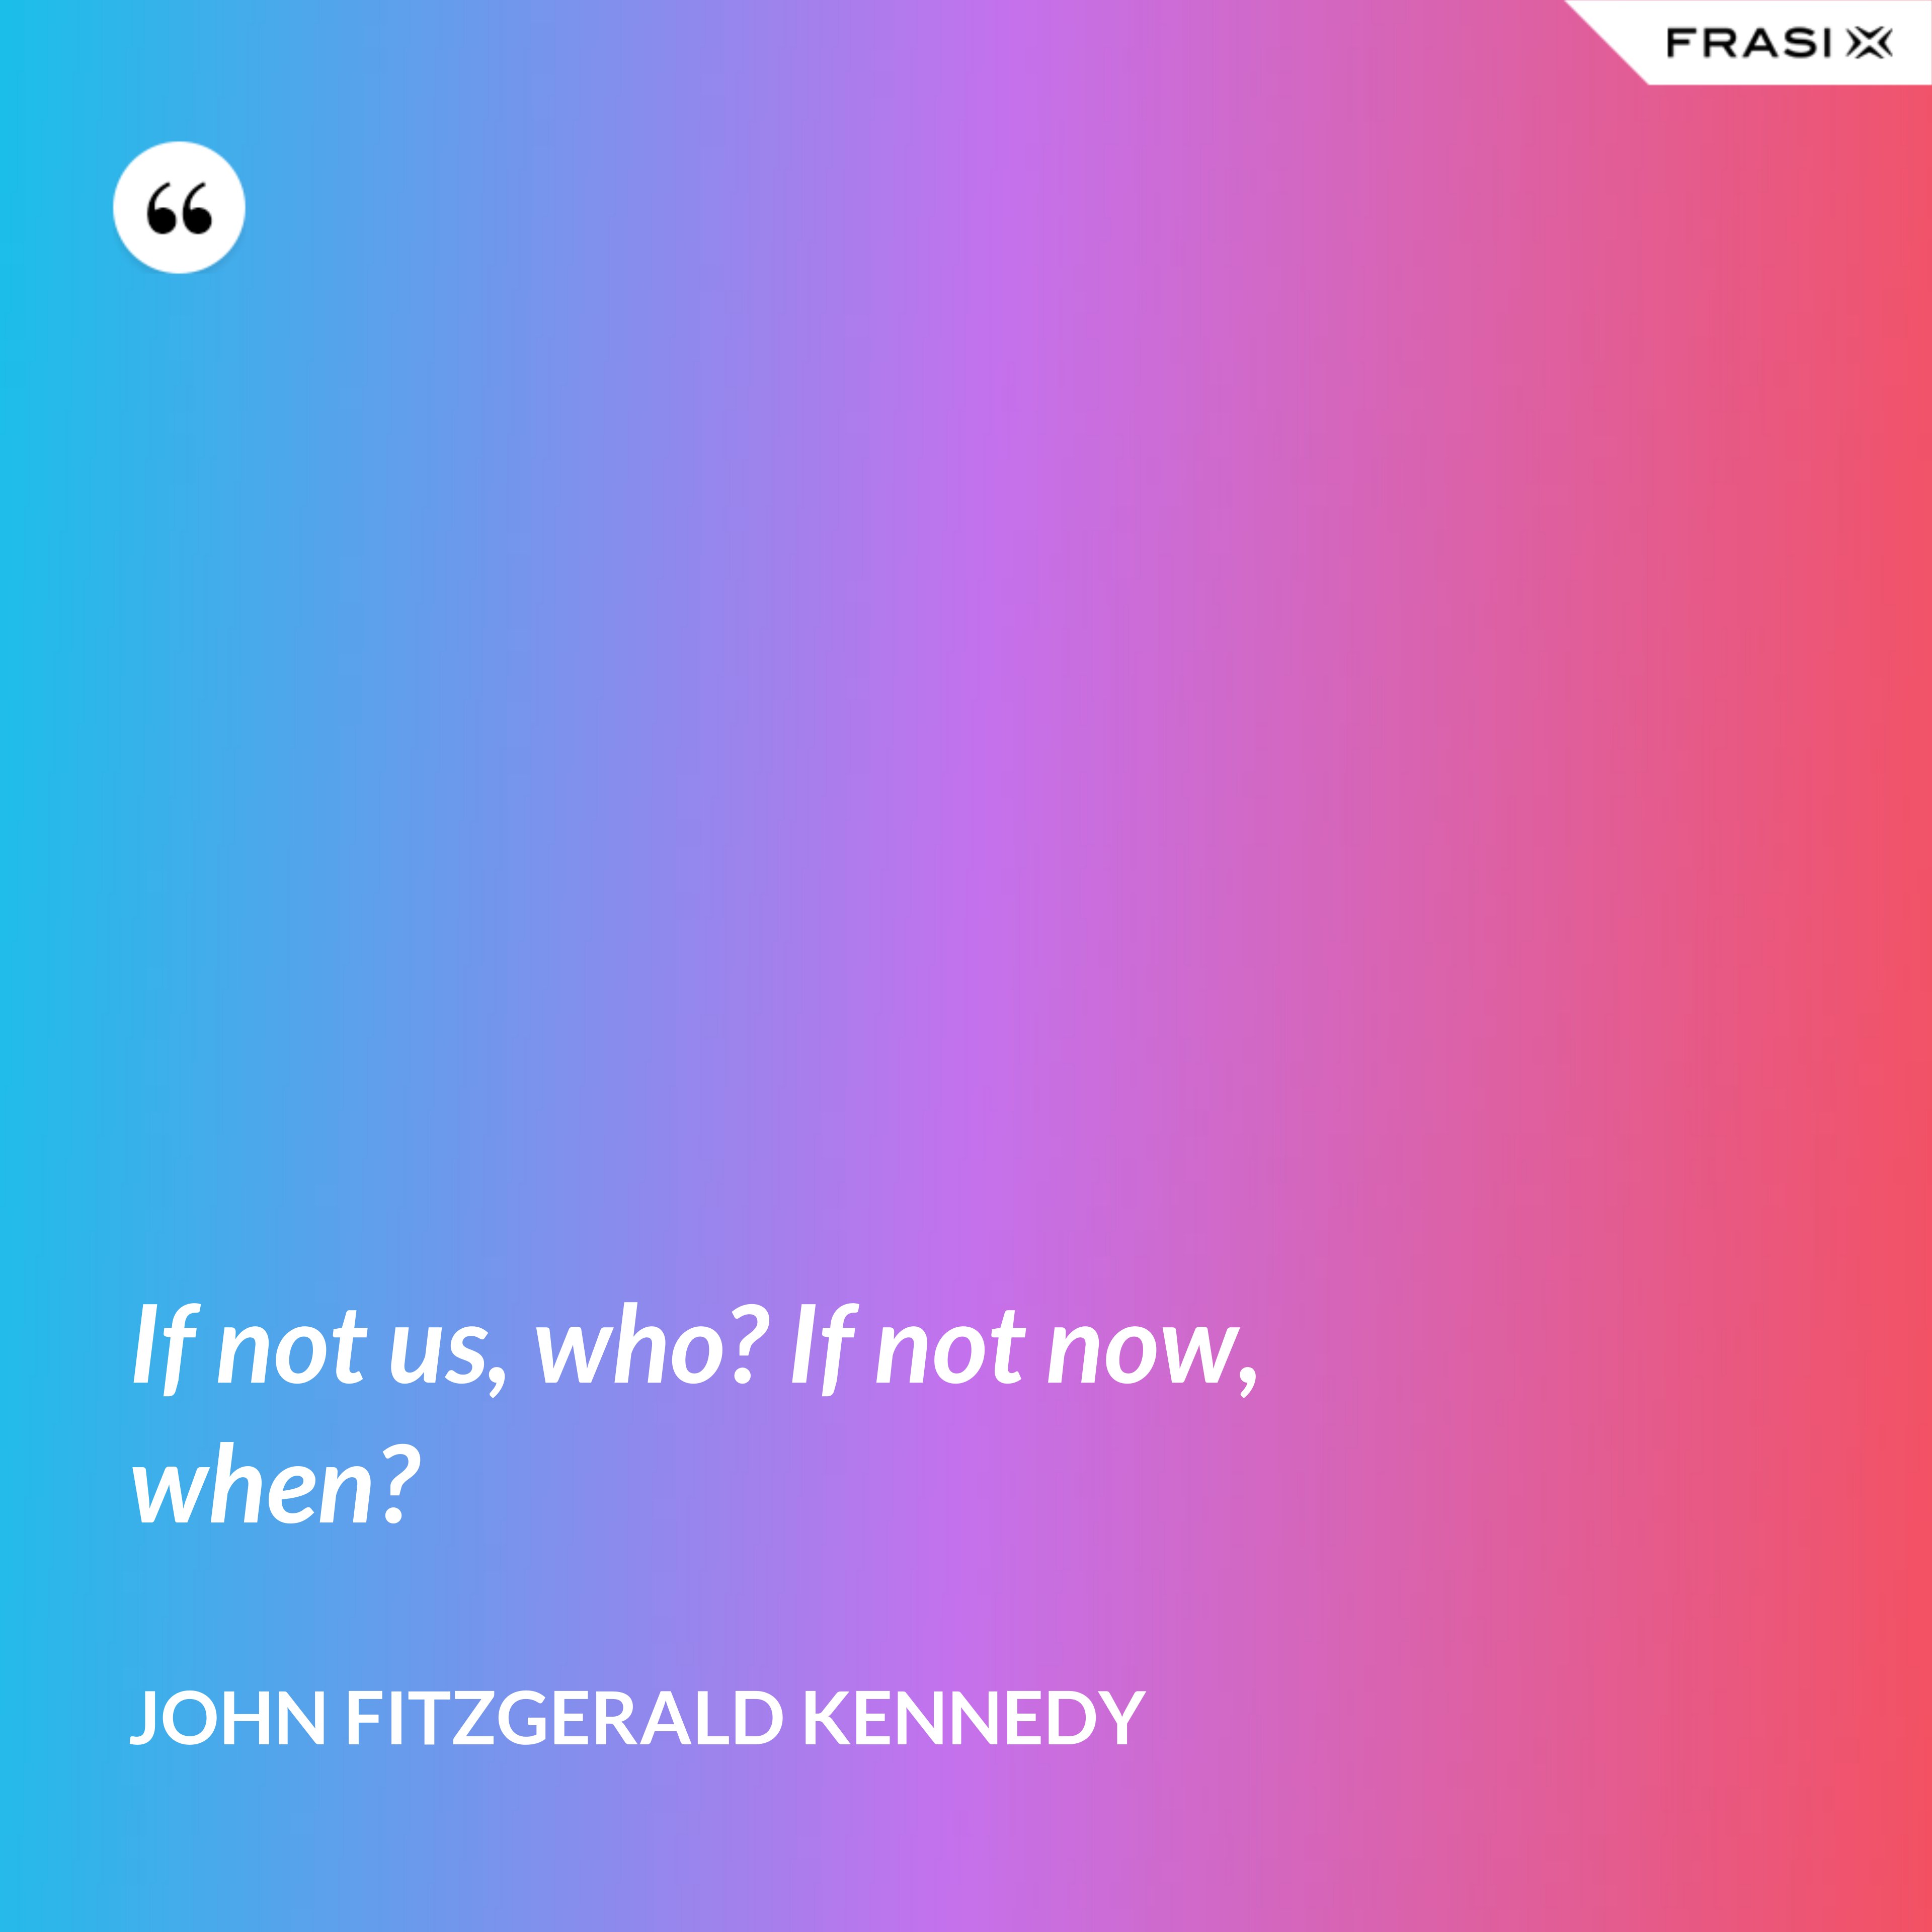 If not us, who? If not now, when? - John Fitzgerald Kennedy